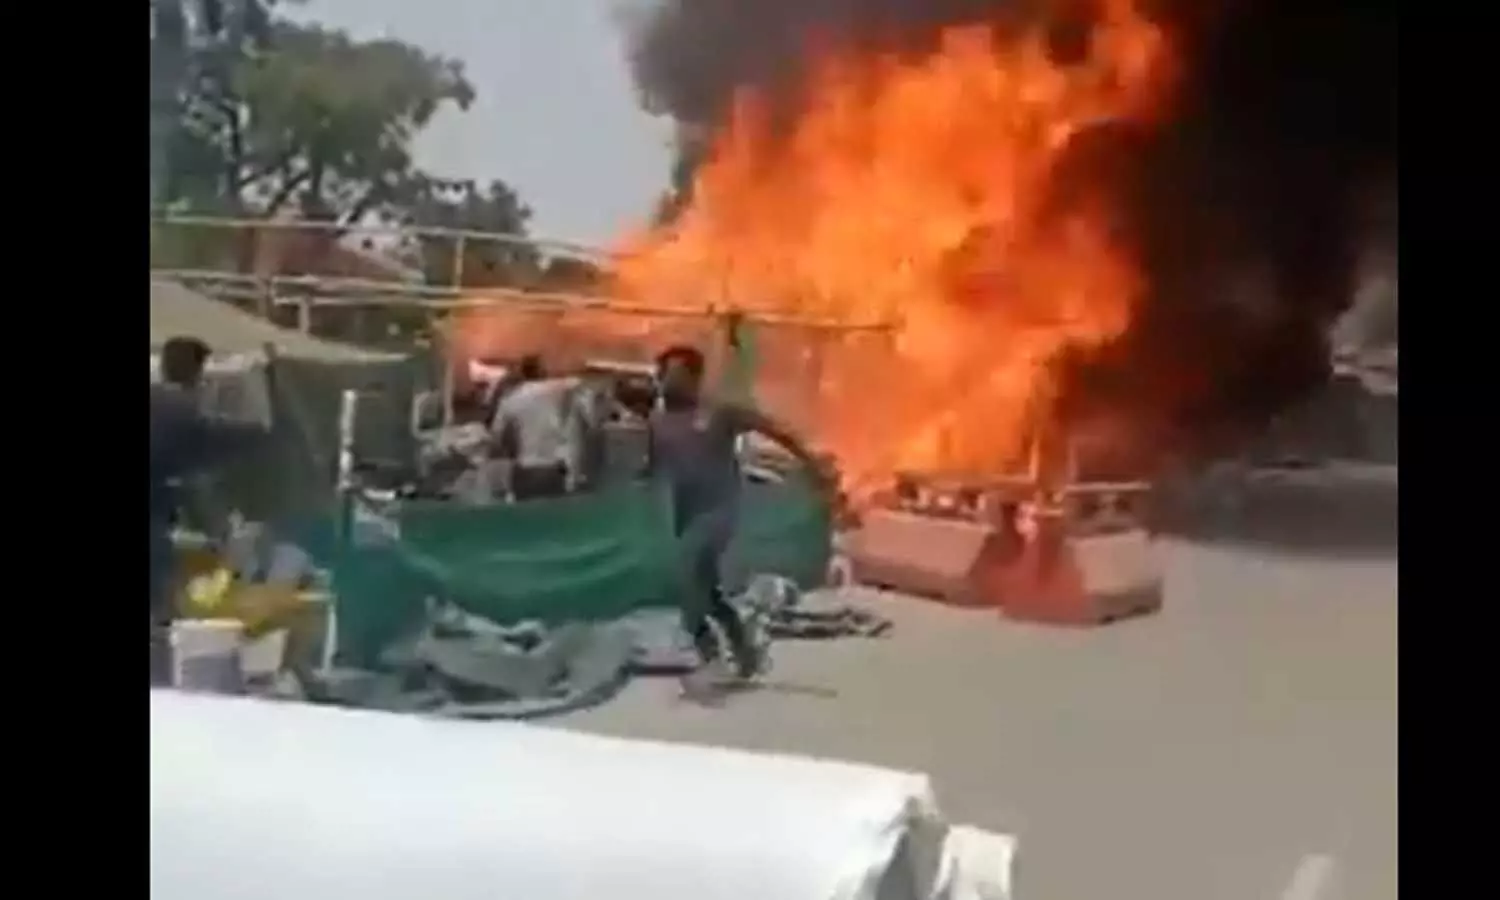 Farmers Protest: Two tents allegedly set on fire by miscreants at Singhu Border